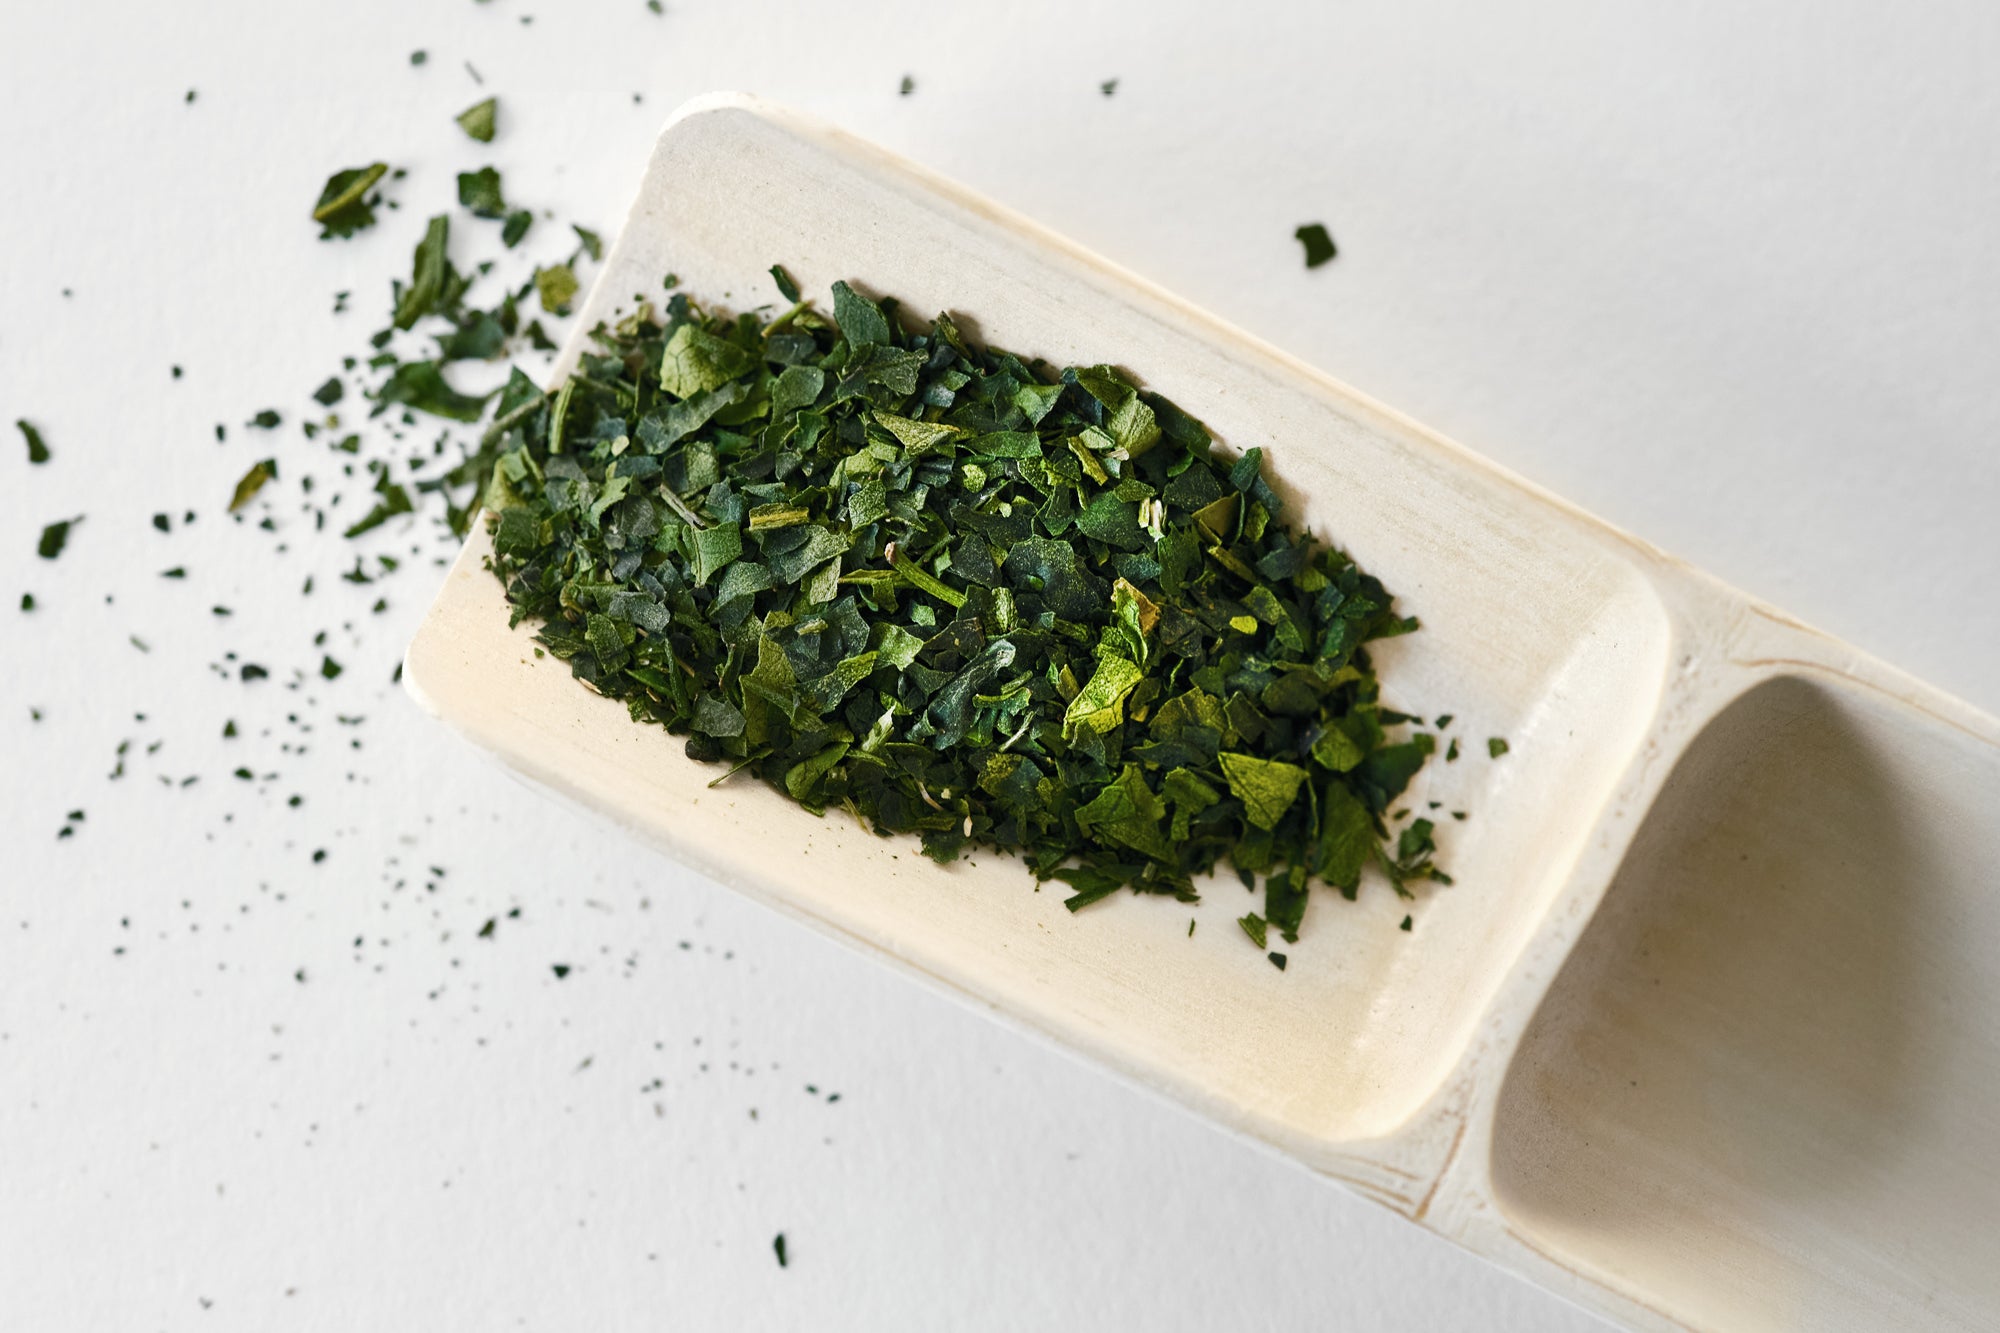 A larger bamboo scoop holding dark green, whole matcha leaves.